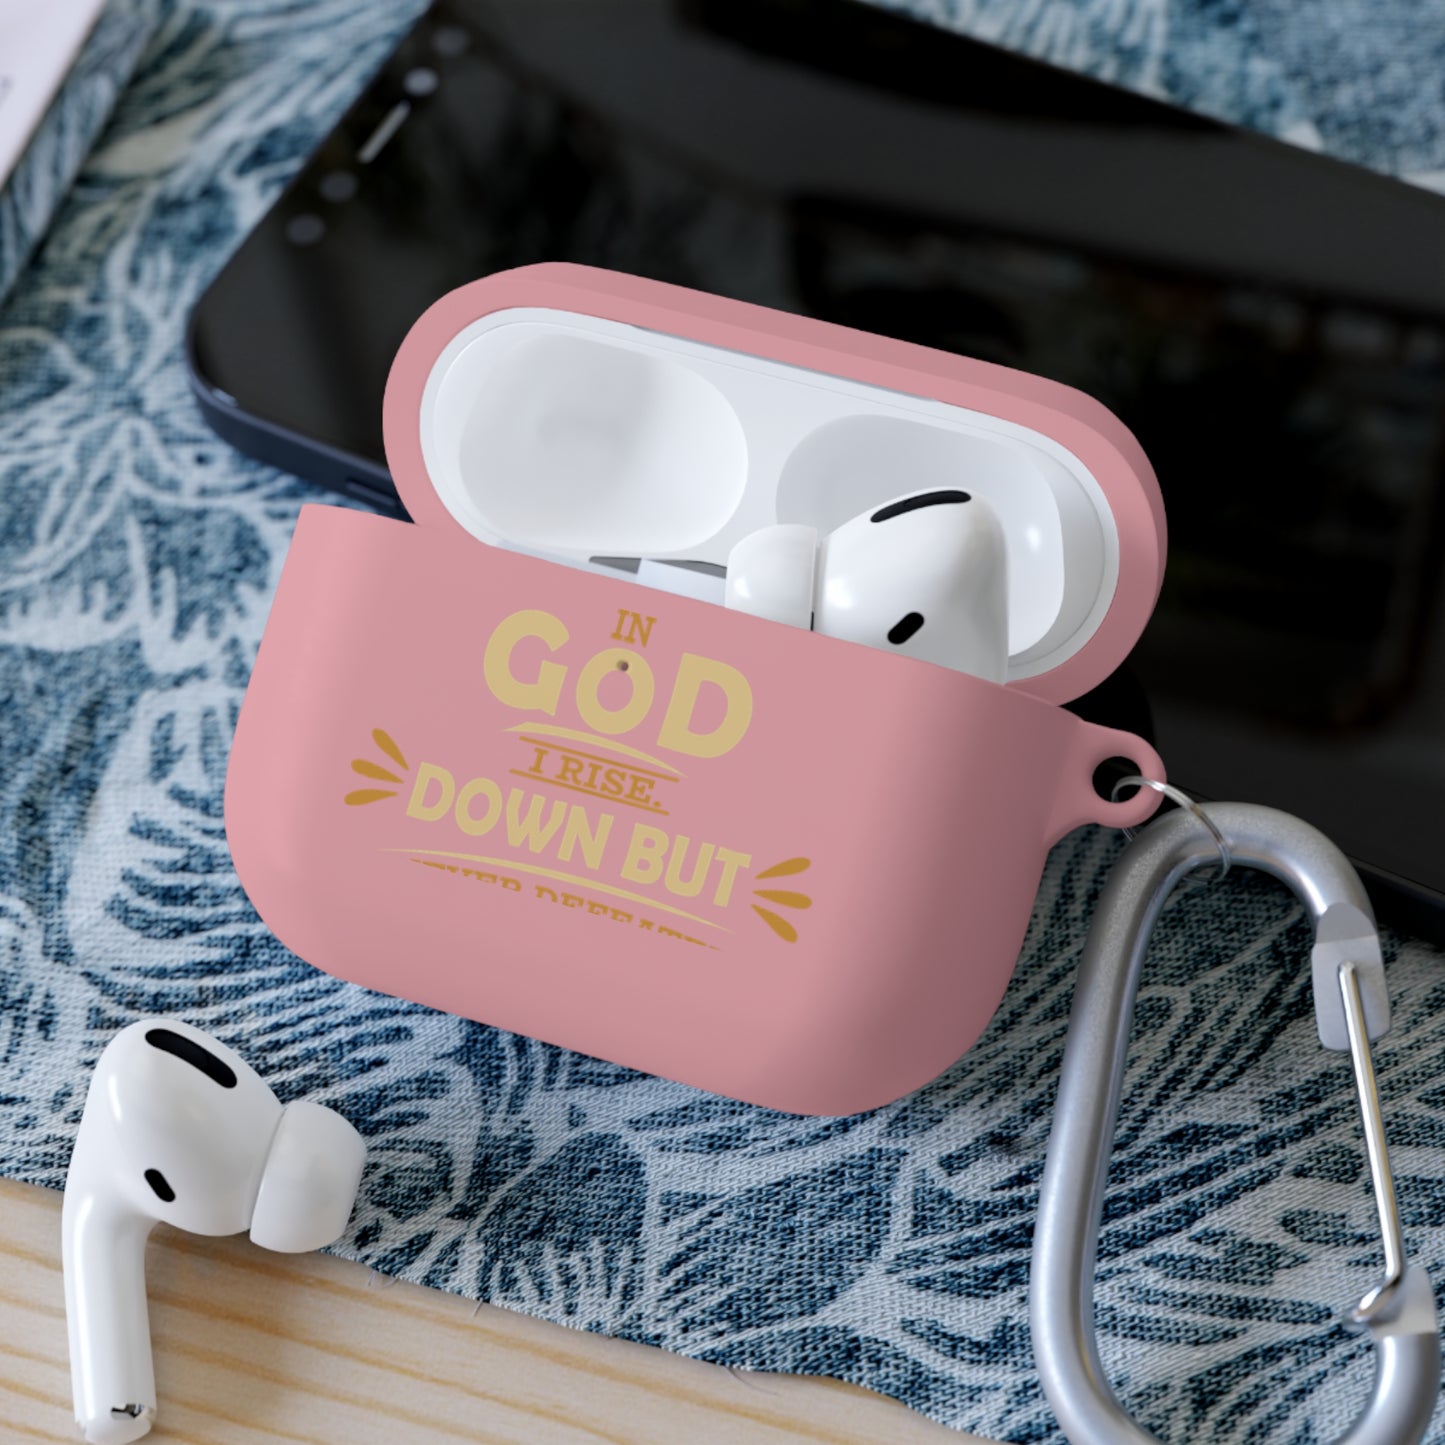 In God I Rise Down But Not Defeated Airpod / Airpods Pro Case cover